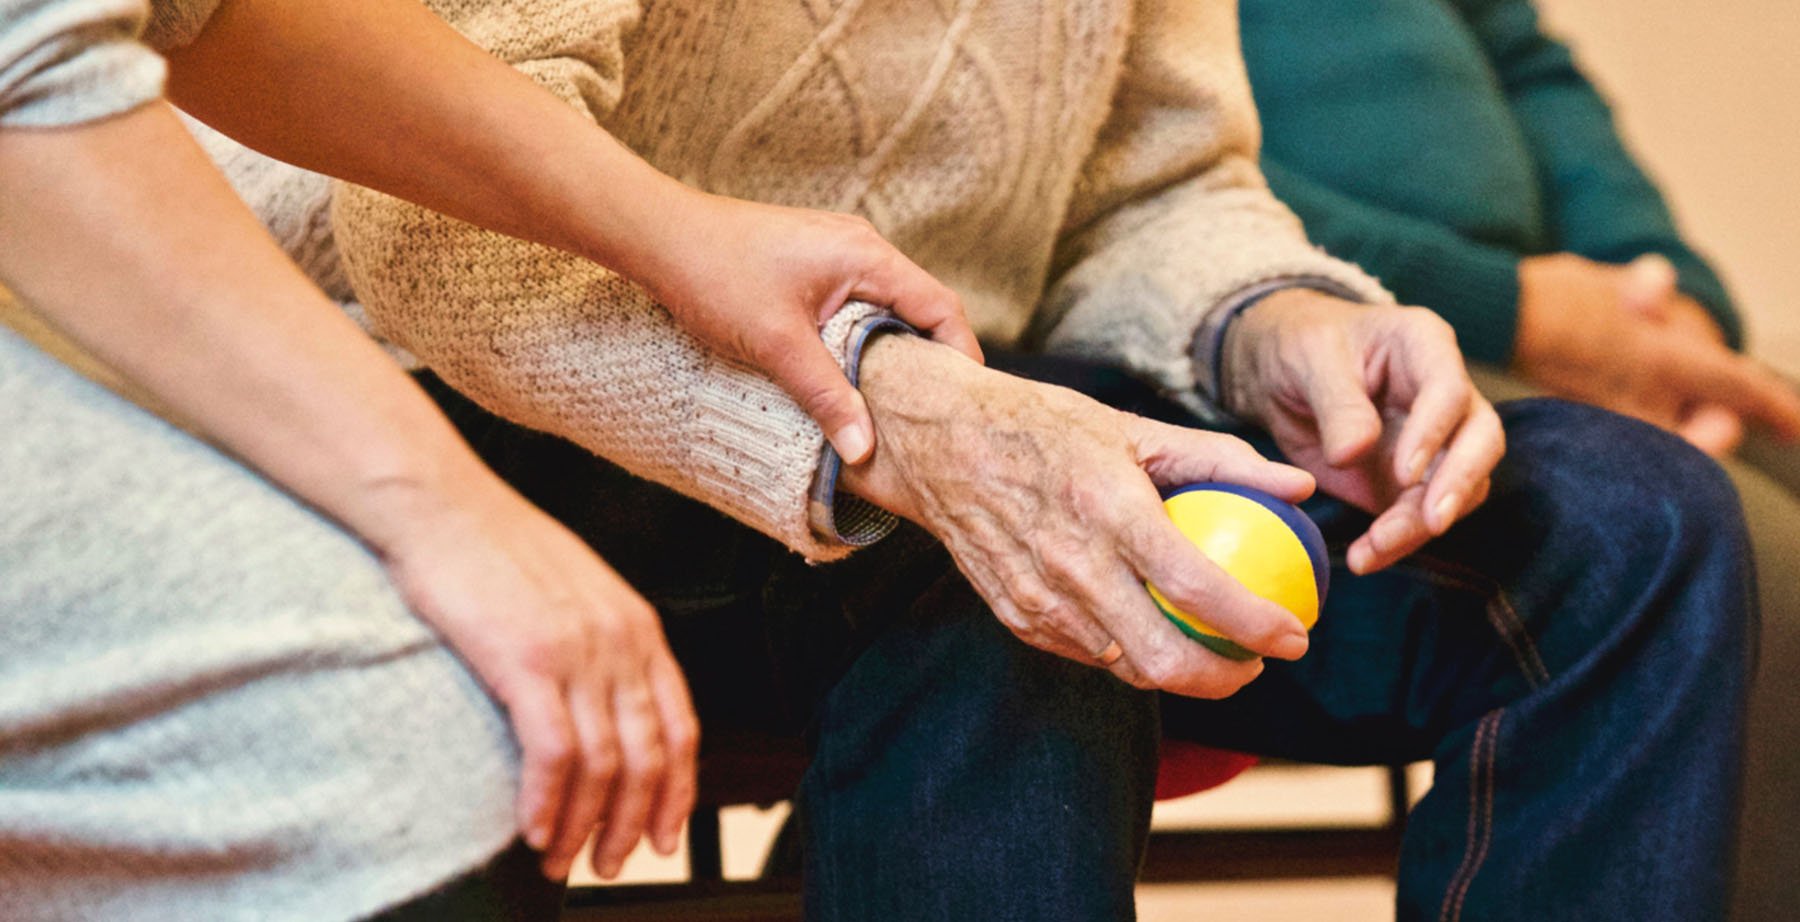 a person puts their hand on the arm of an older gentleman who is holding a ball in his hand